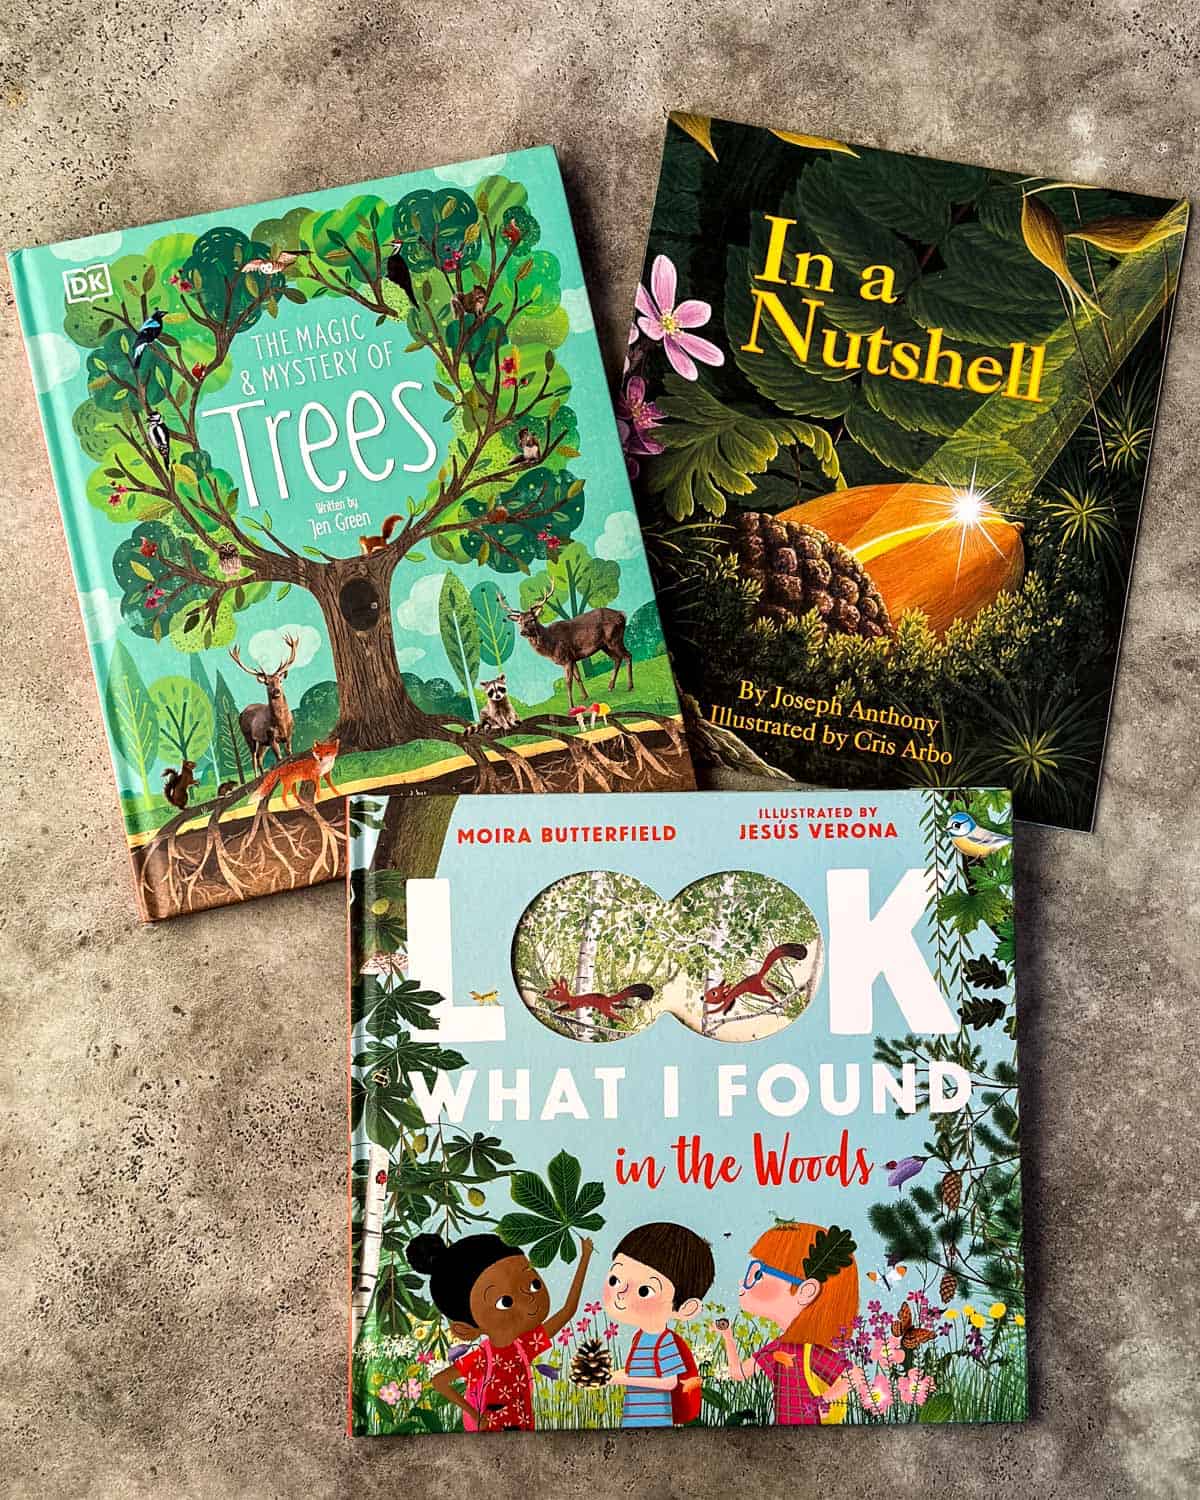 3 tree books for kids face up on a gray surface. 